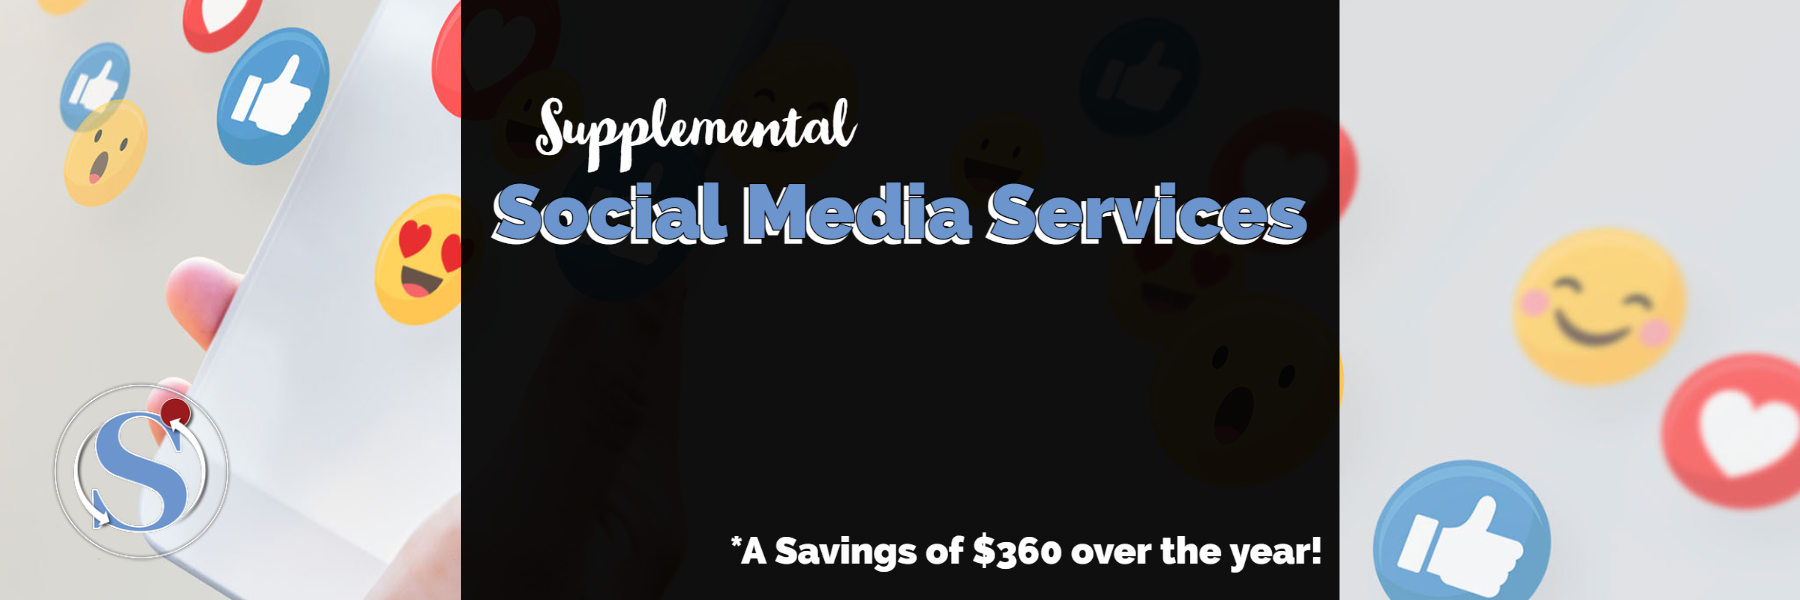 Save Big on our Supplemental Social Media Services!